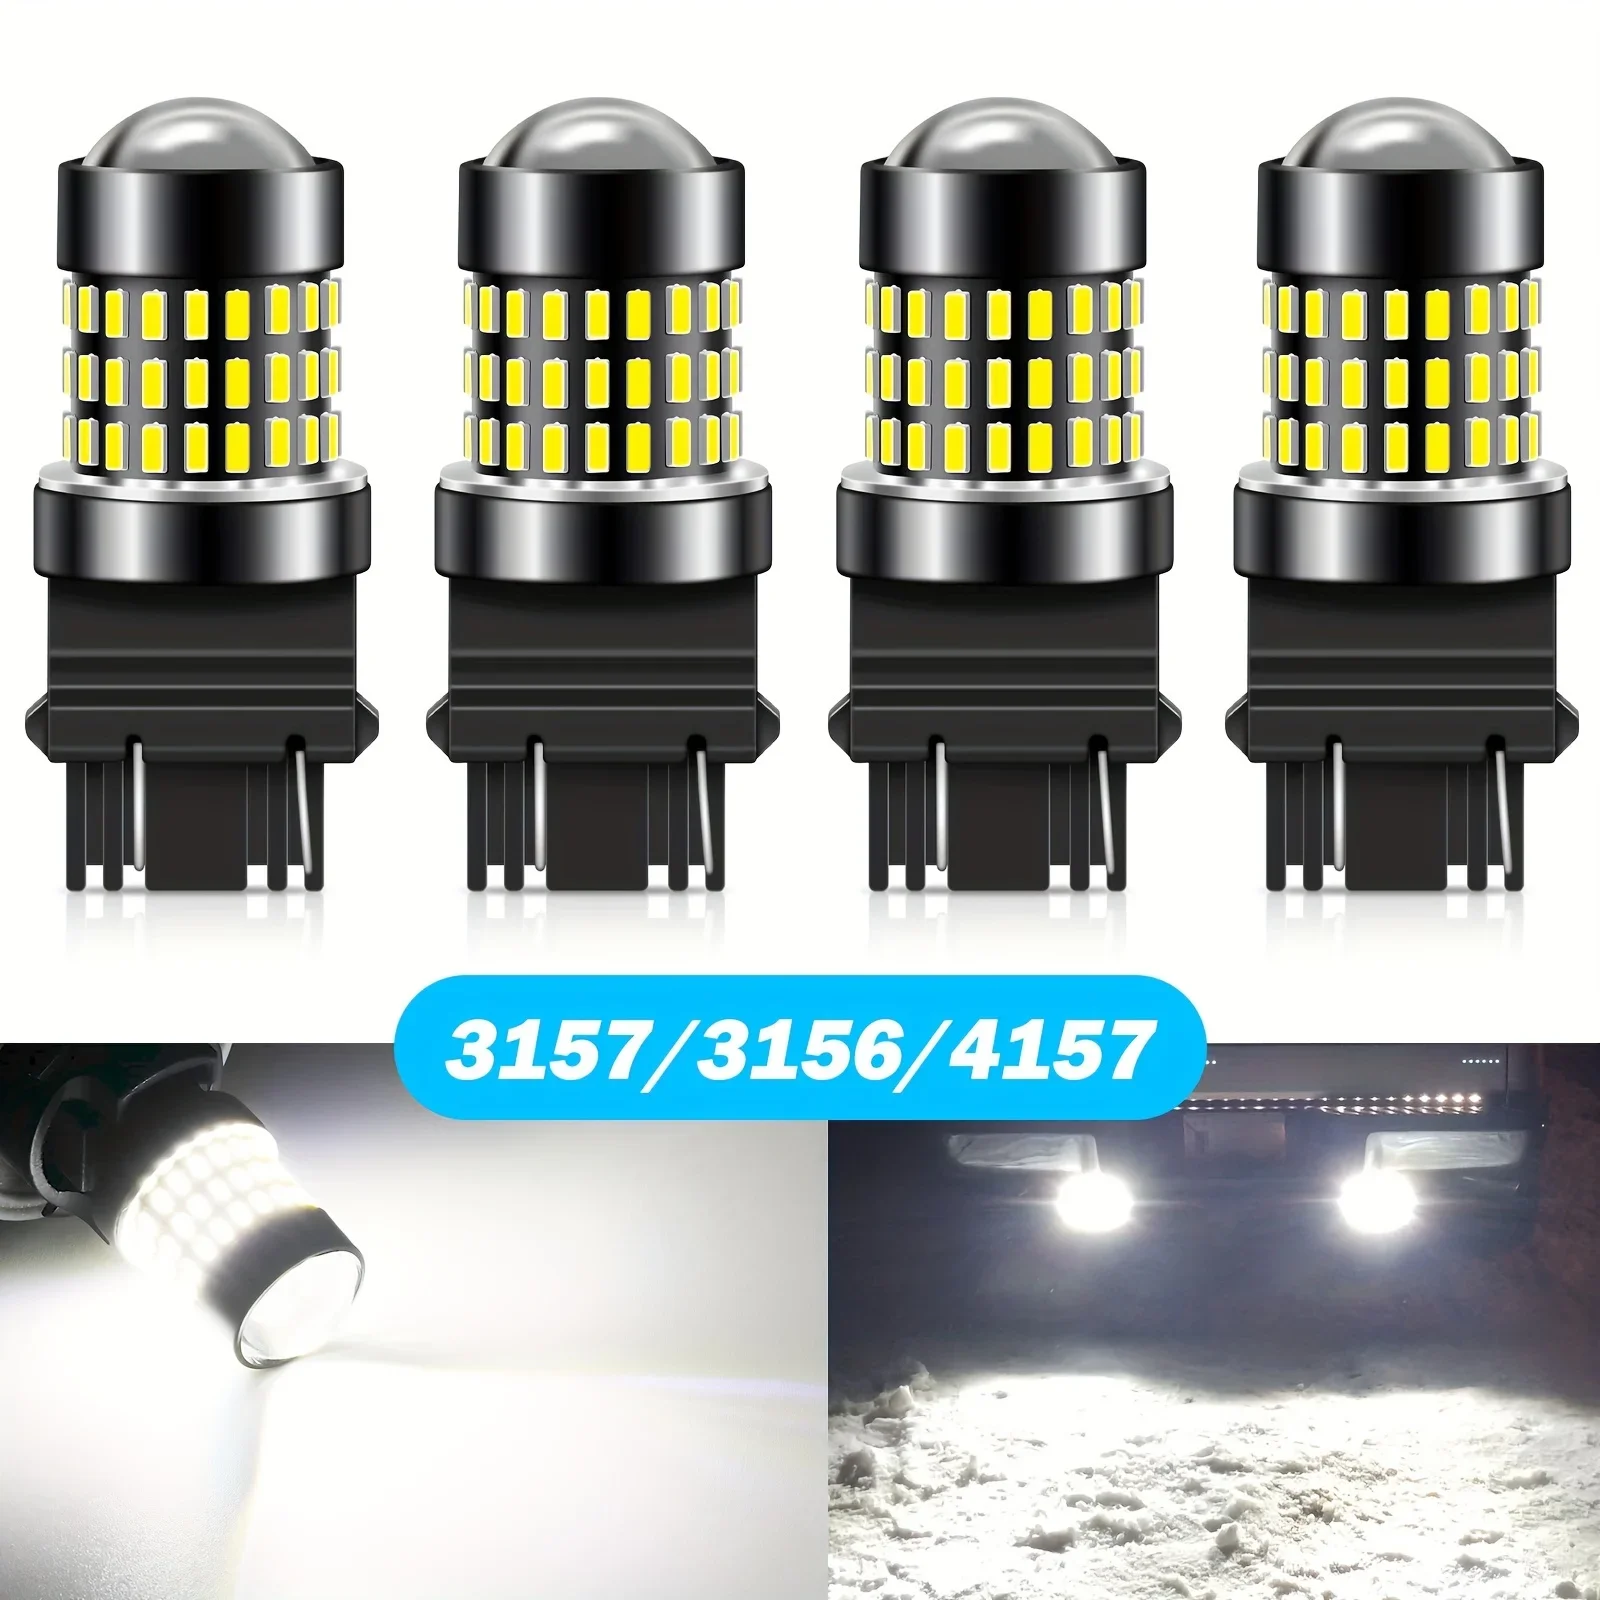 

Super Bright 4W 4pcs LED Bulbs With Projector for Turn Signal Backup Reverse Tail DRL Brake Light, 12-24V T25 3156 3157 4157 305